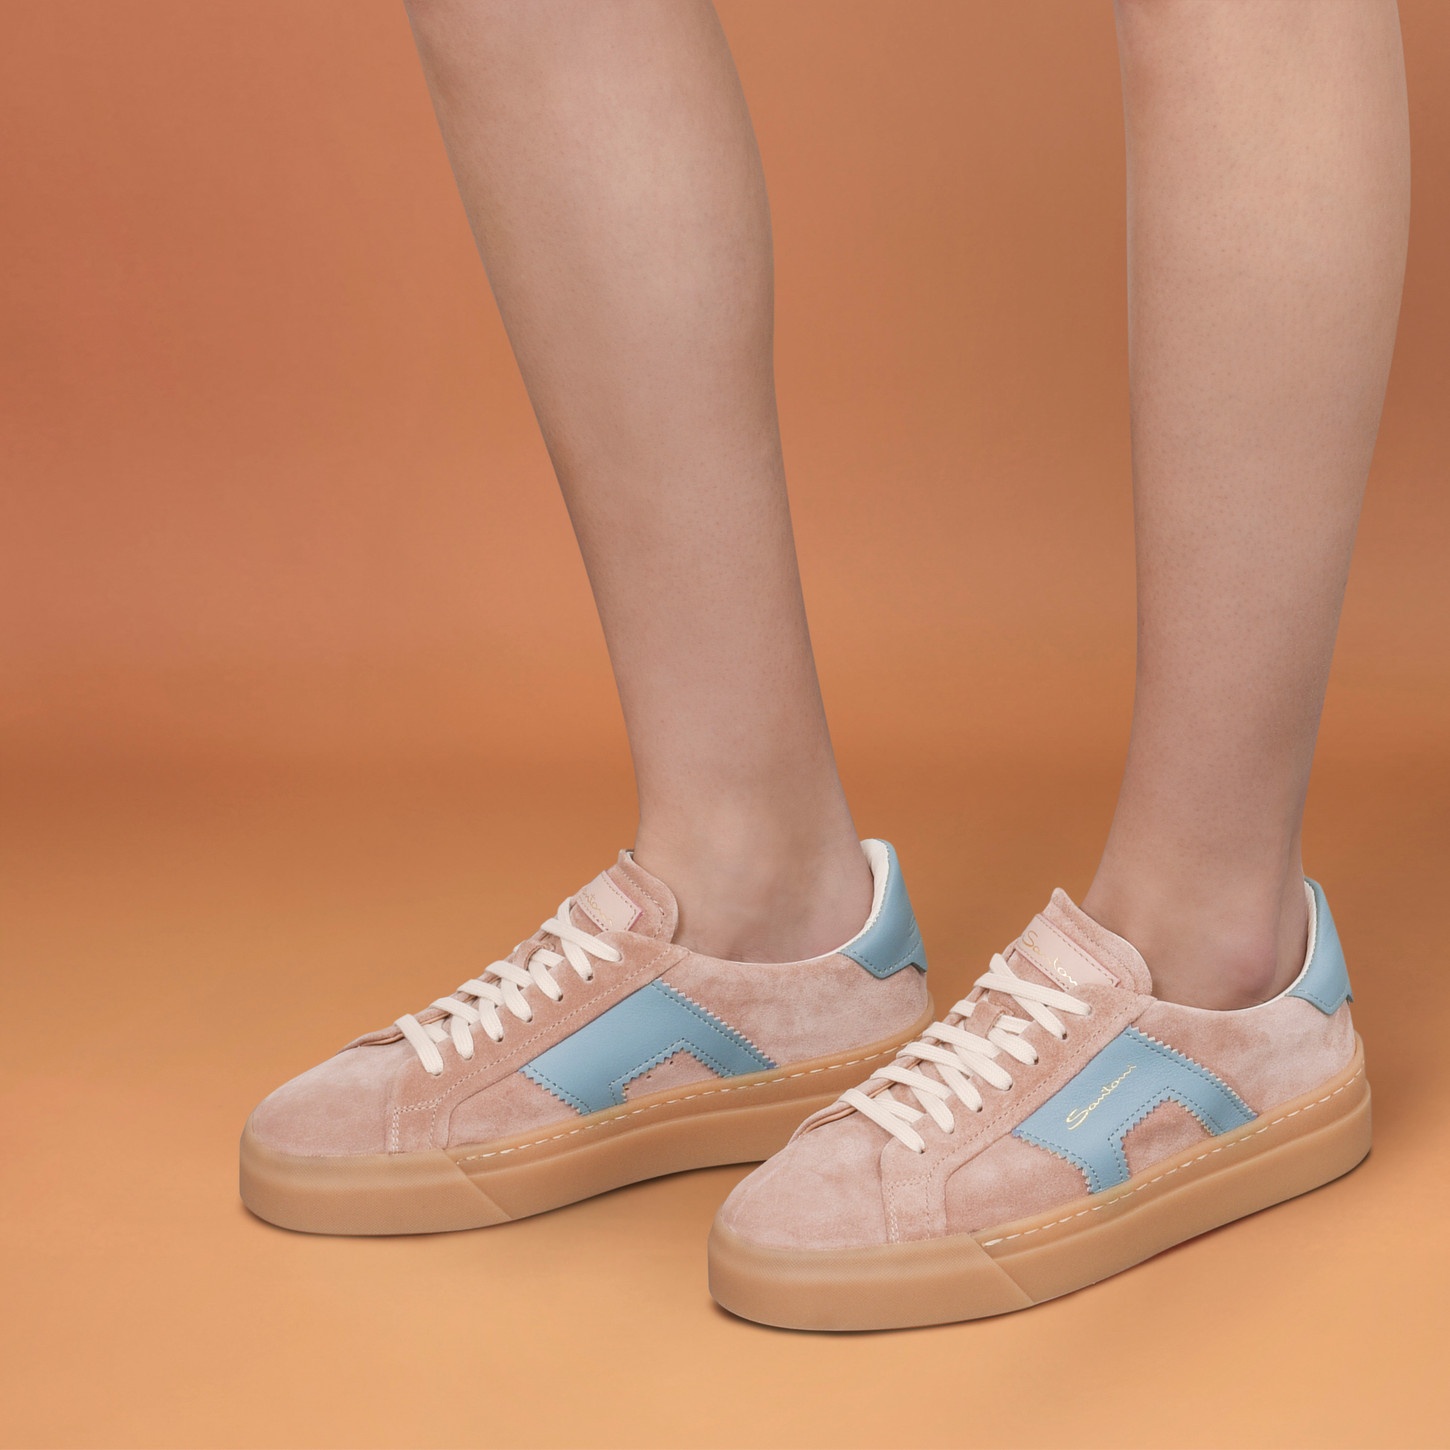 Women's pink and light blue suede and leather double buckle sneaker - 2